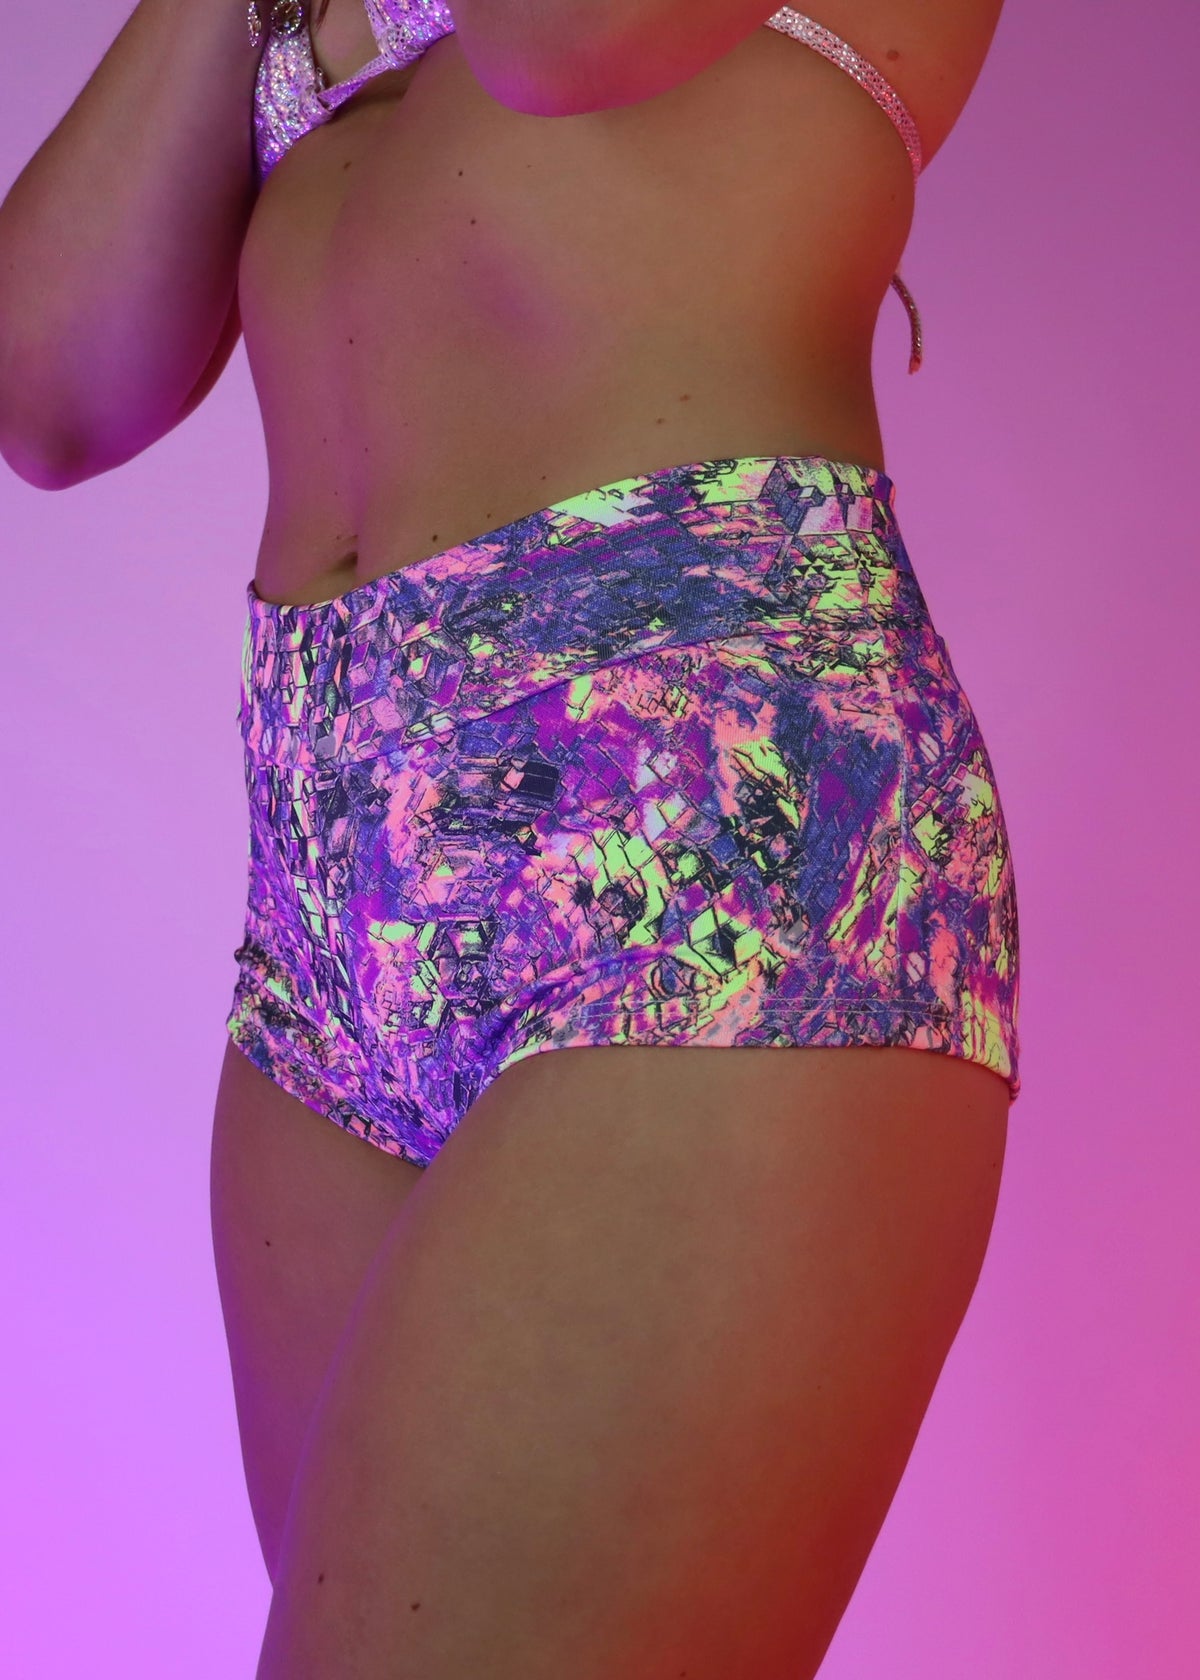 LOST FREQUENCY PURPLE BOOTY SHORTS